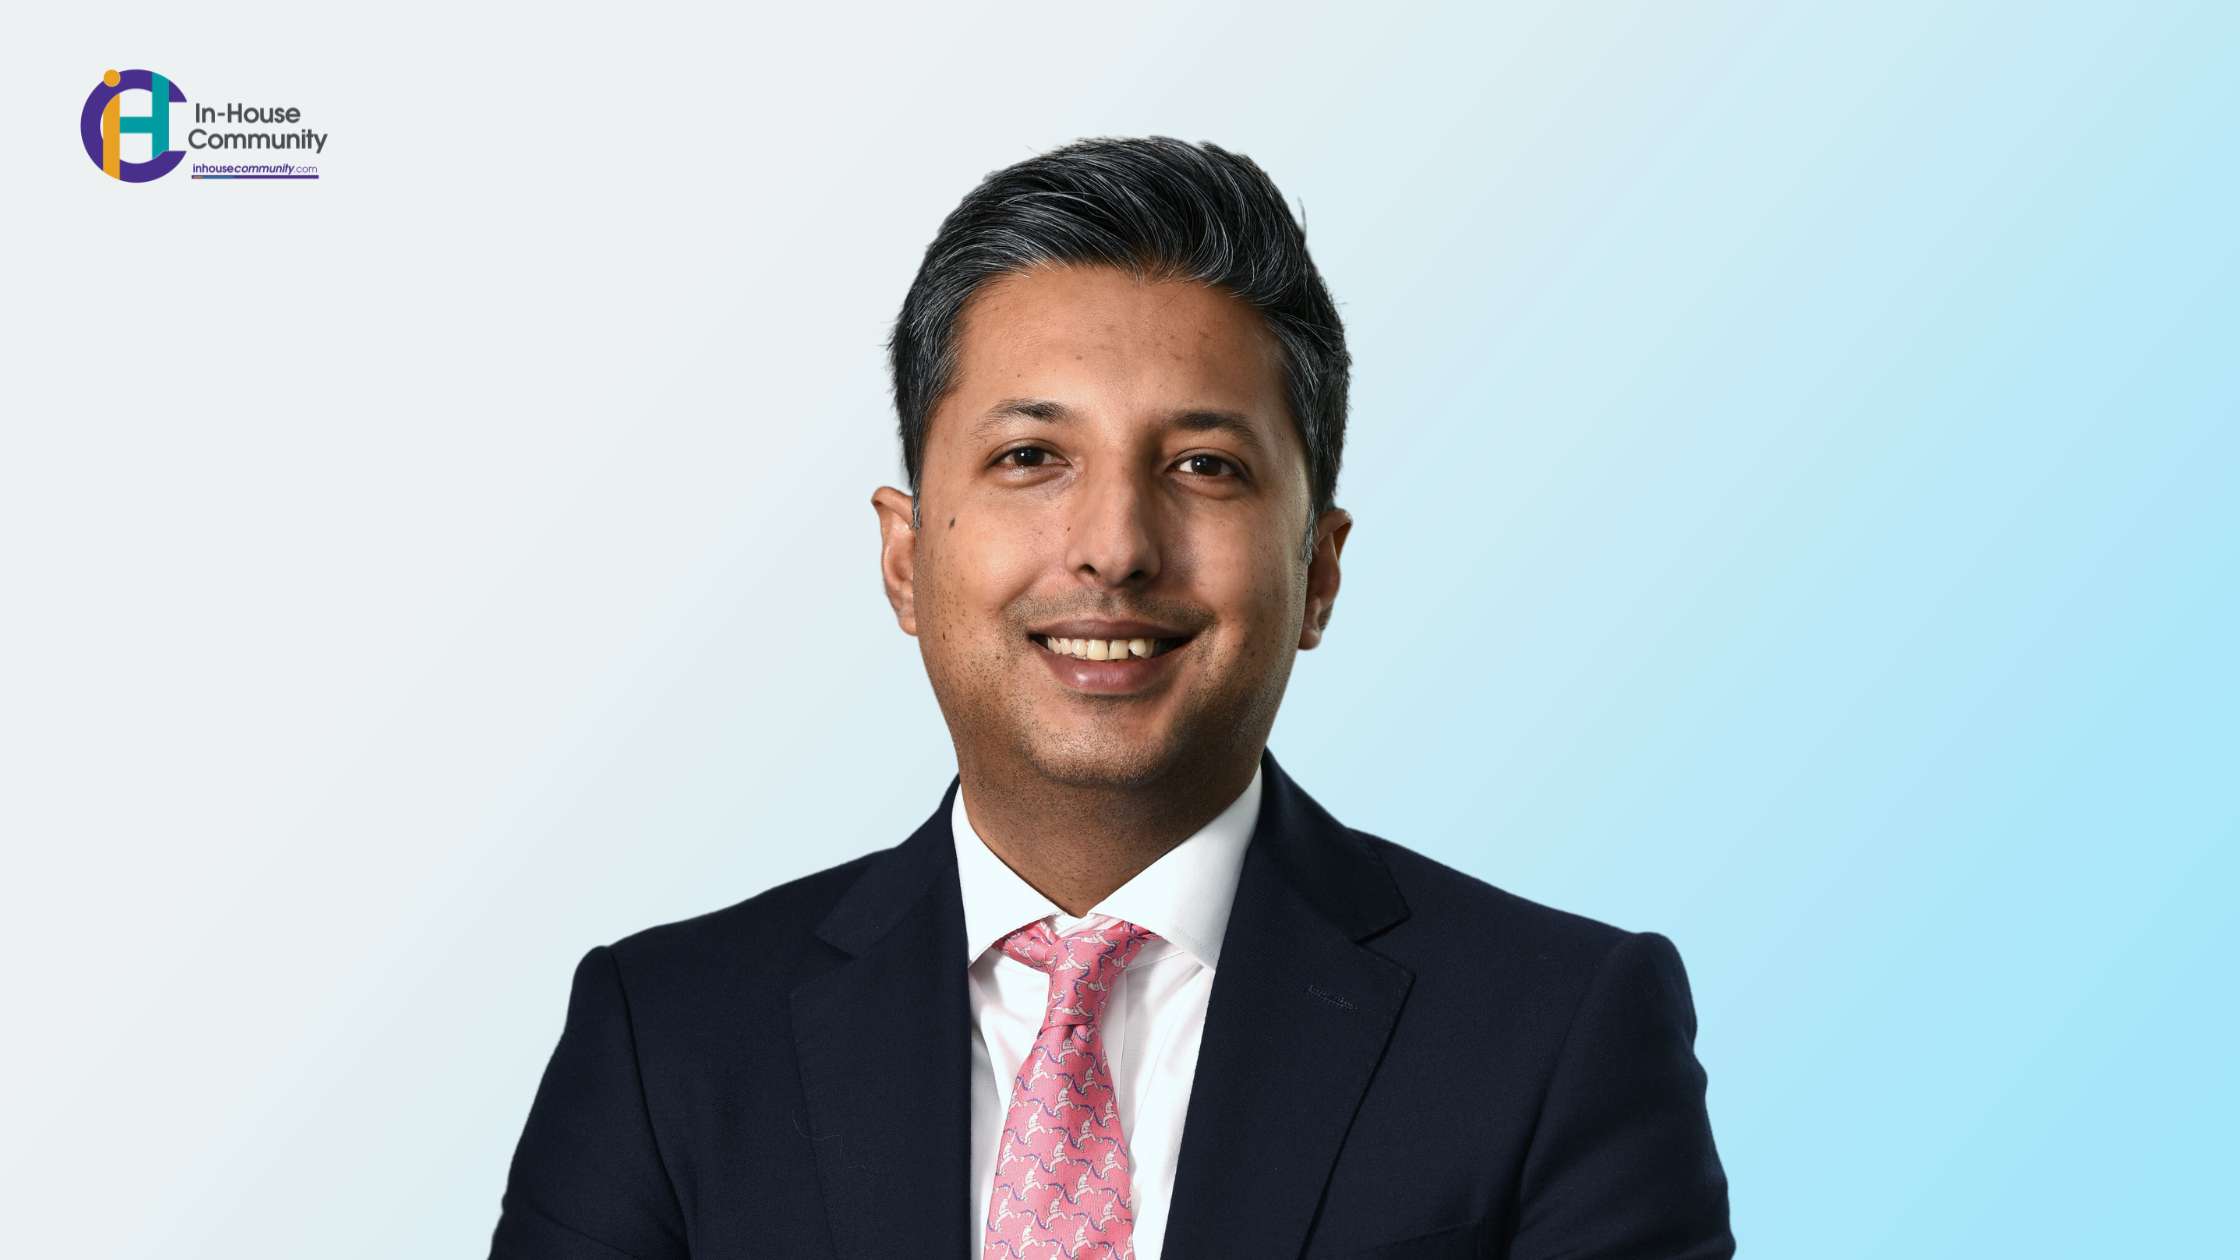 Rahul Rai, Delhi-based partner & co-founder of Axiom5 Law Chambers LLP. Rai was previously with AZB & Partners, leading the competition practice in Mumbai.